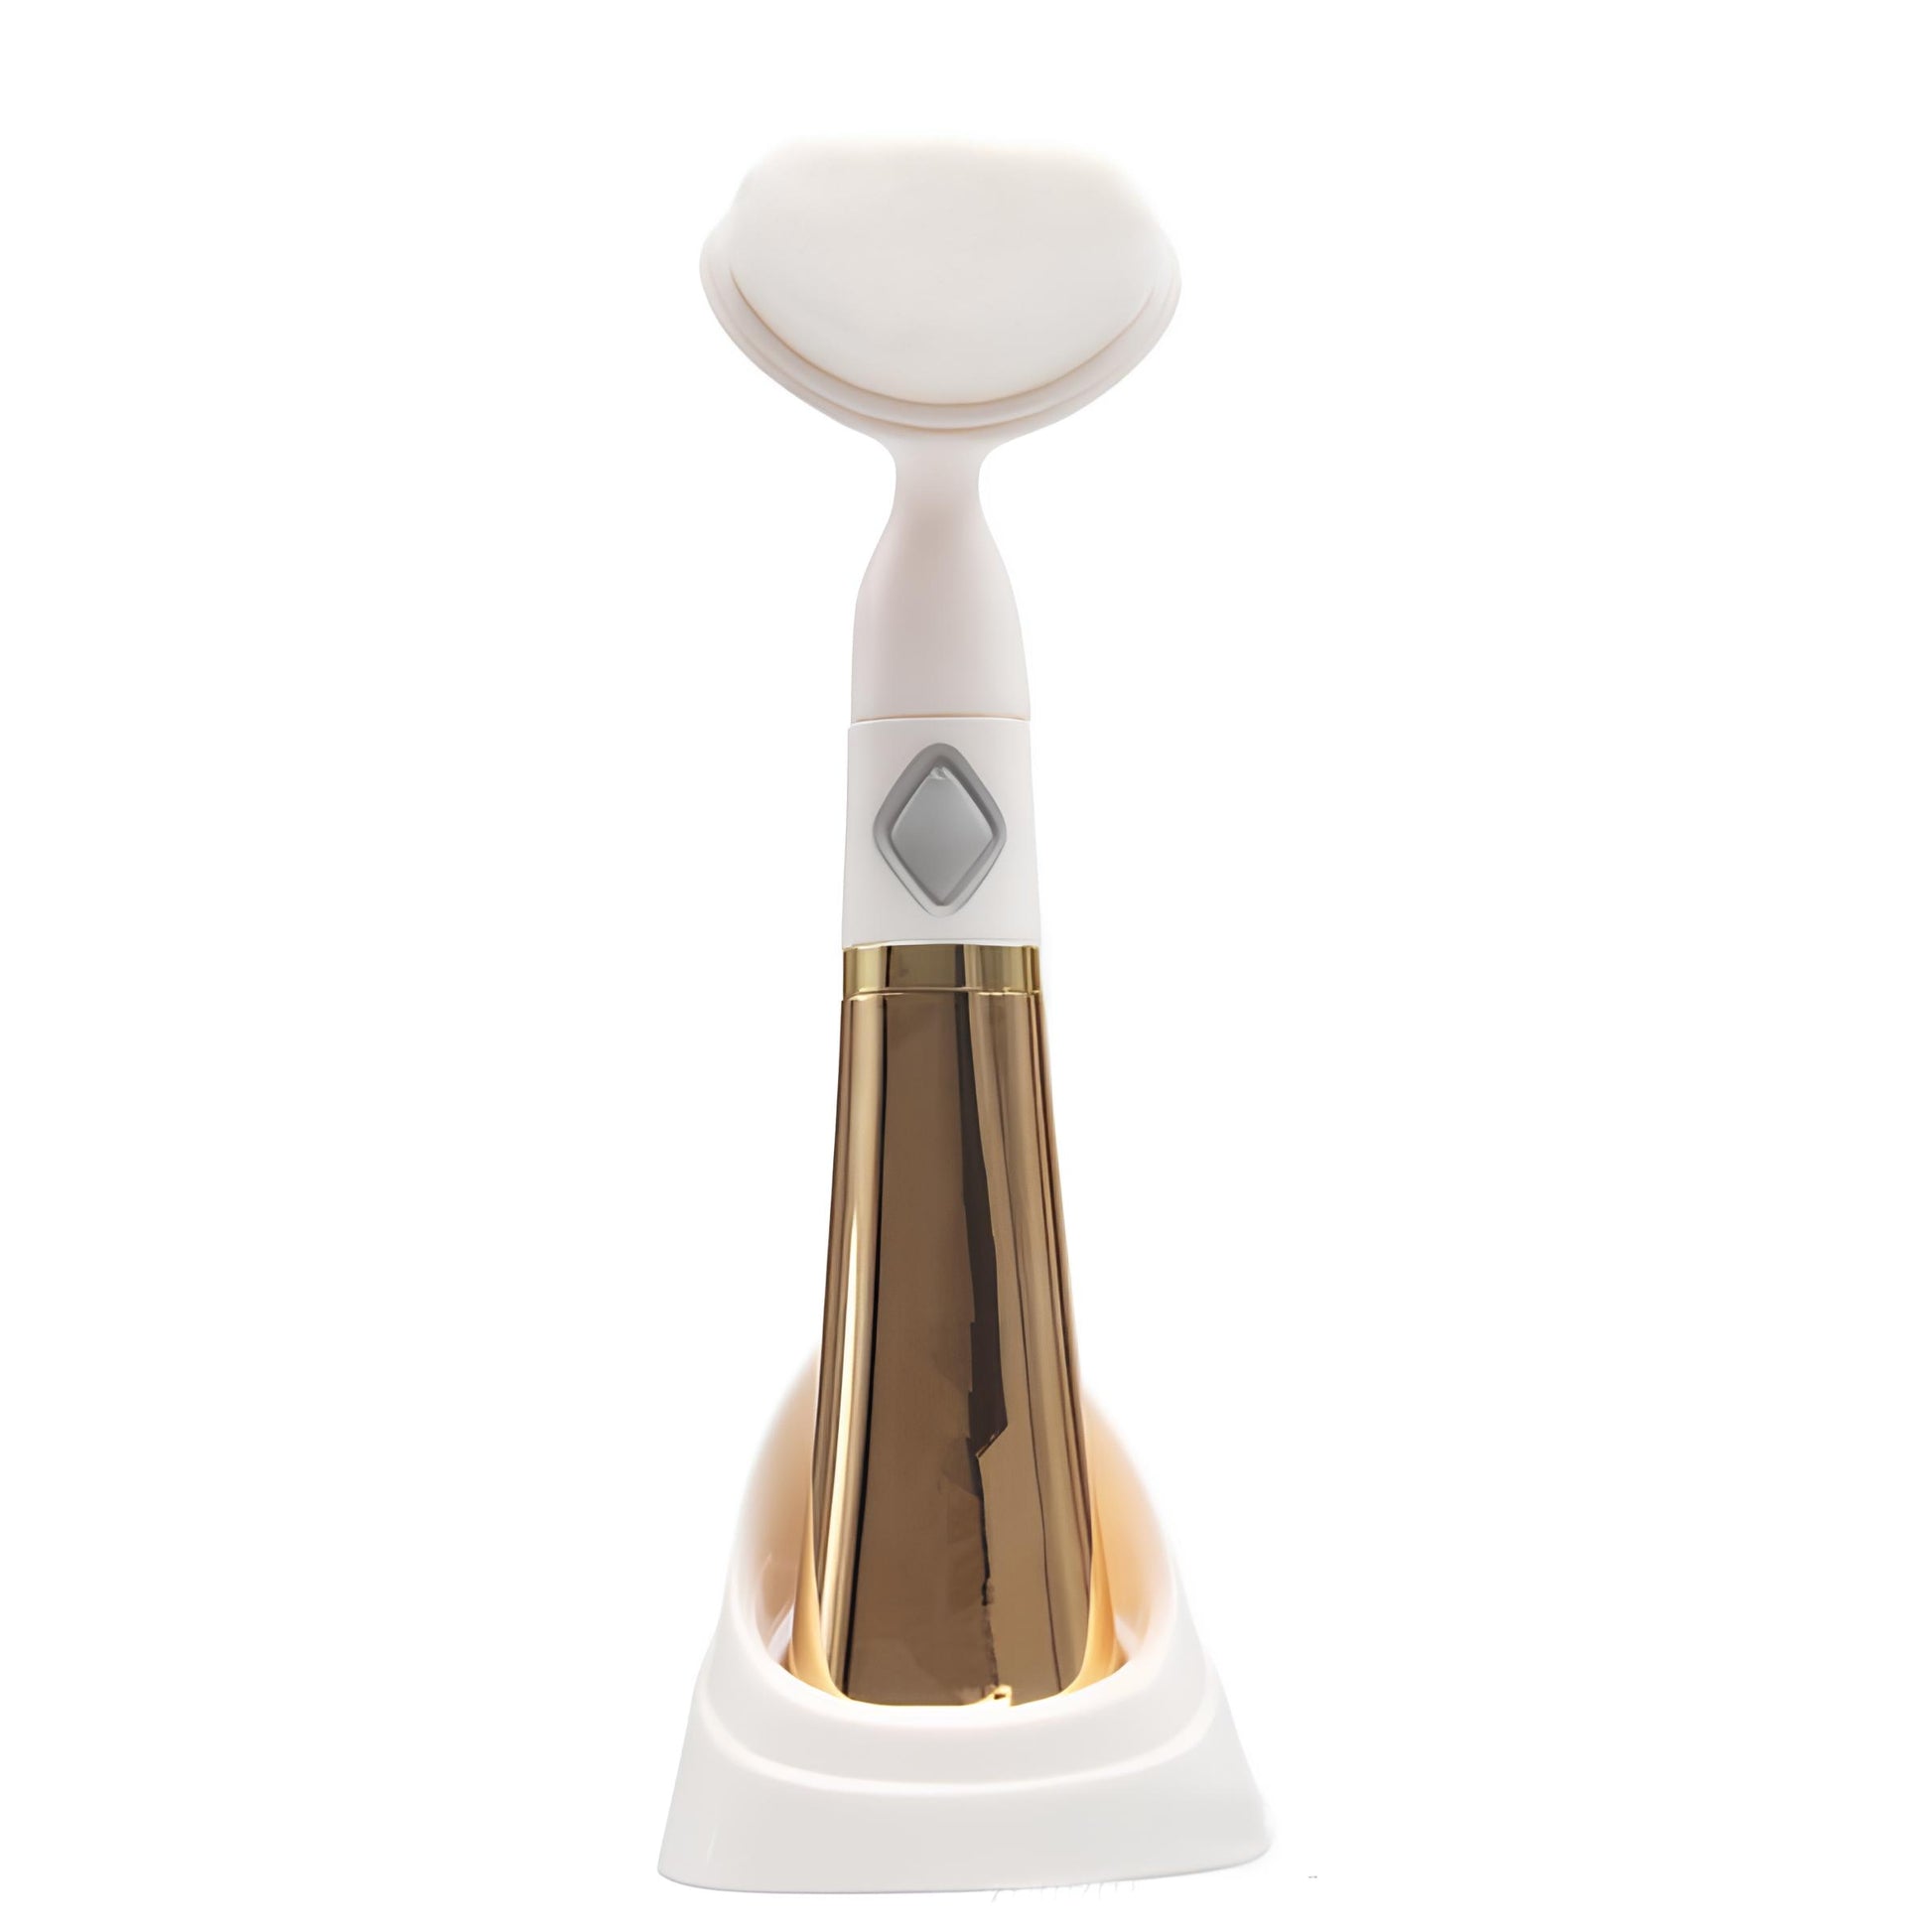 A luxury facial brush with gold accents and soft bristles perfect for gentle exfoliation and removing impurities for a radiant glow. Its compact design makes it ideal for travel.